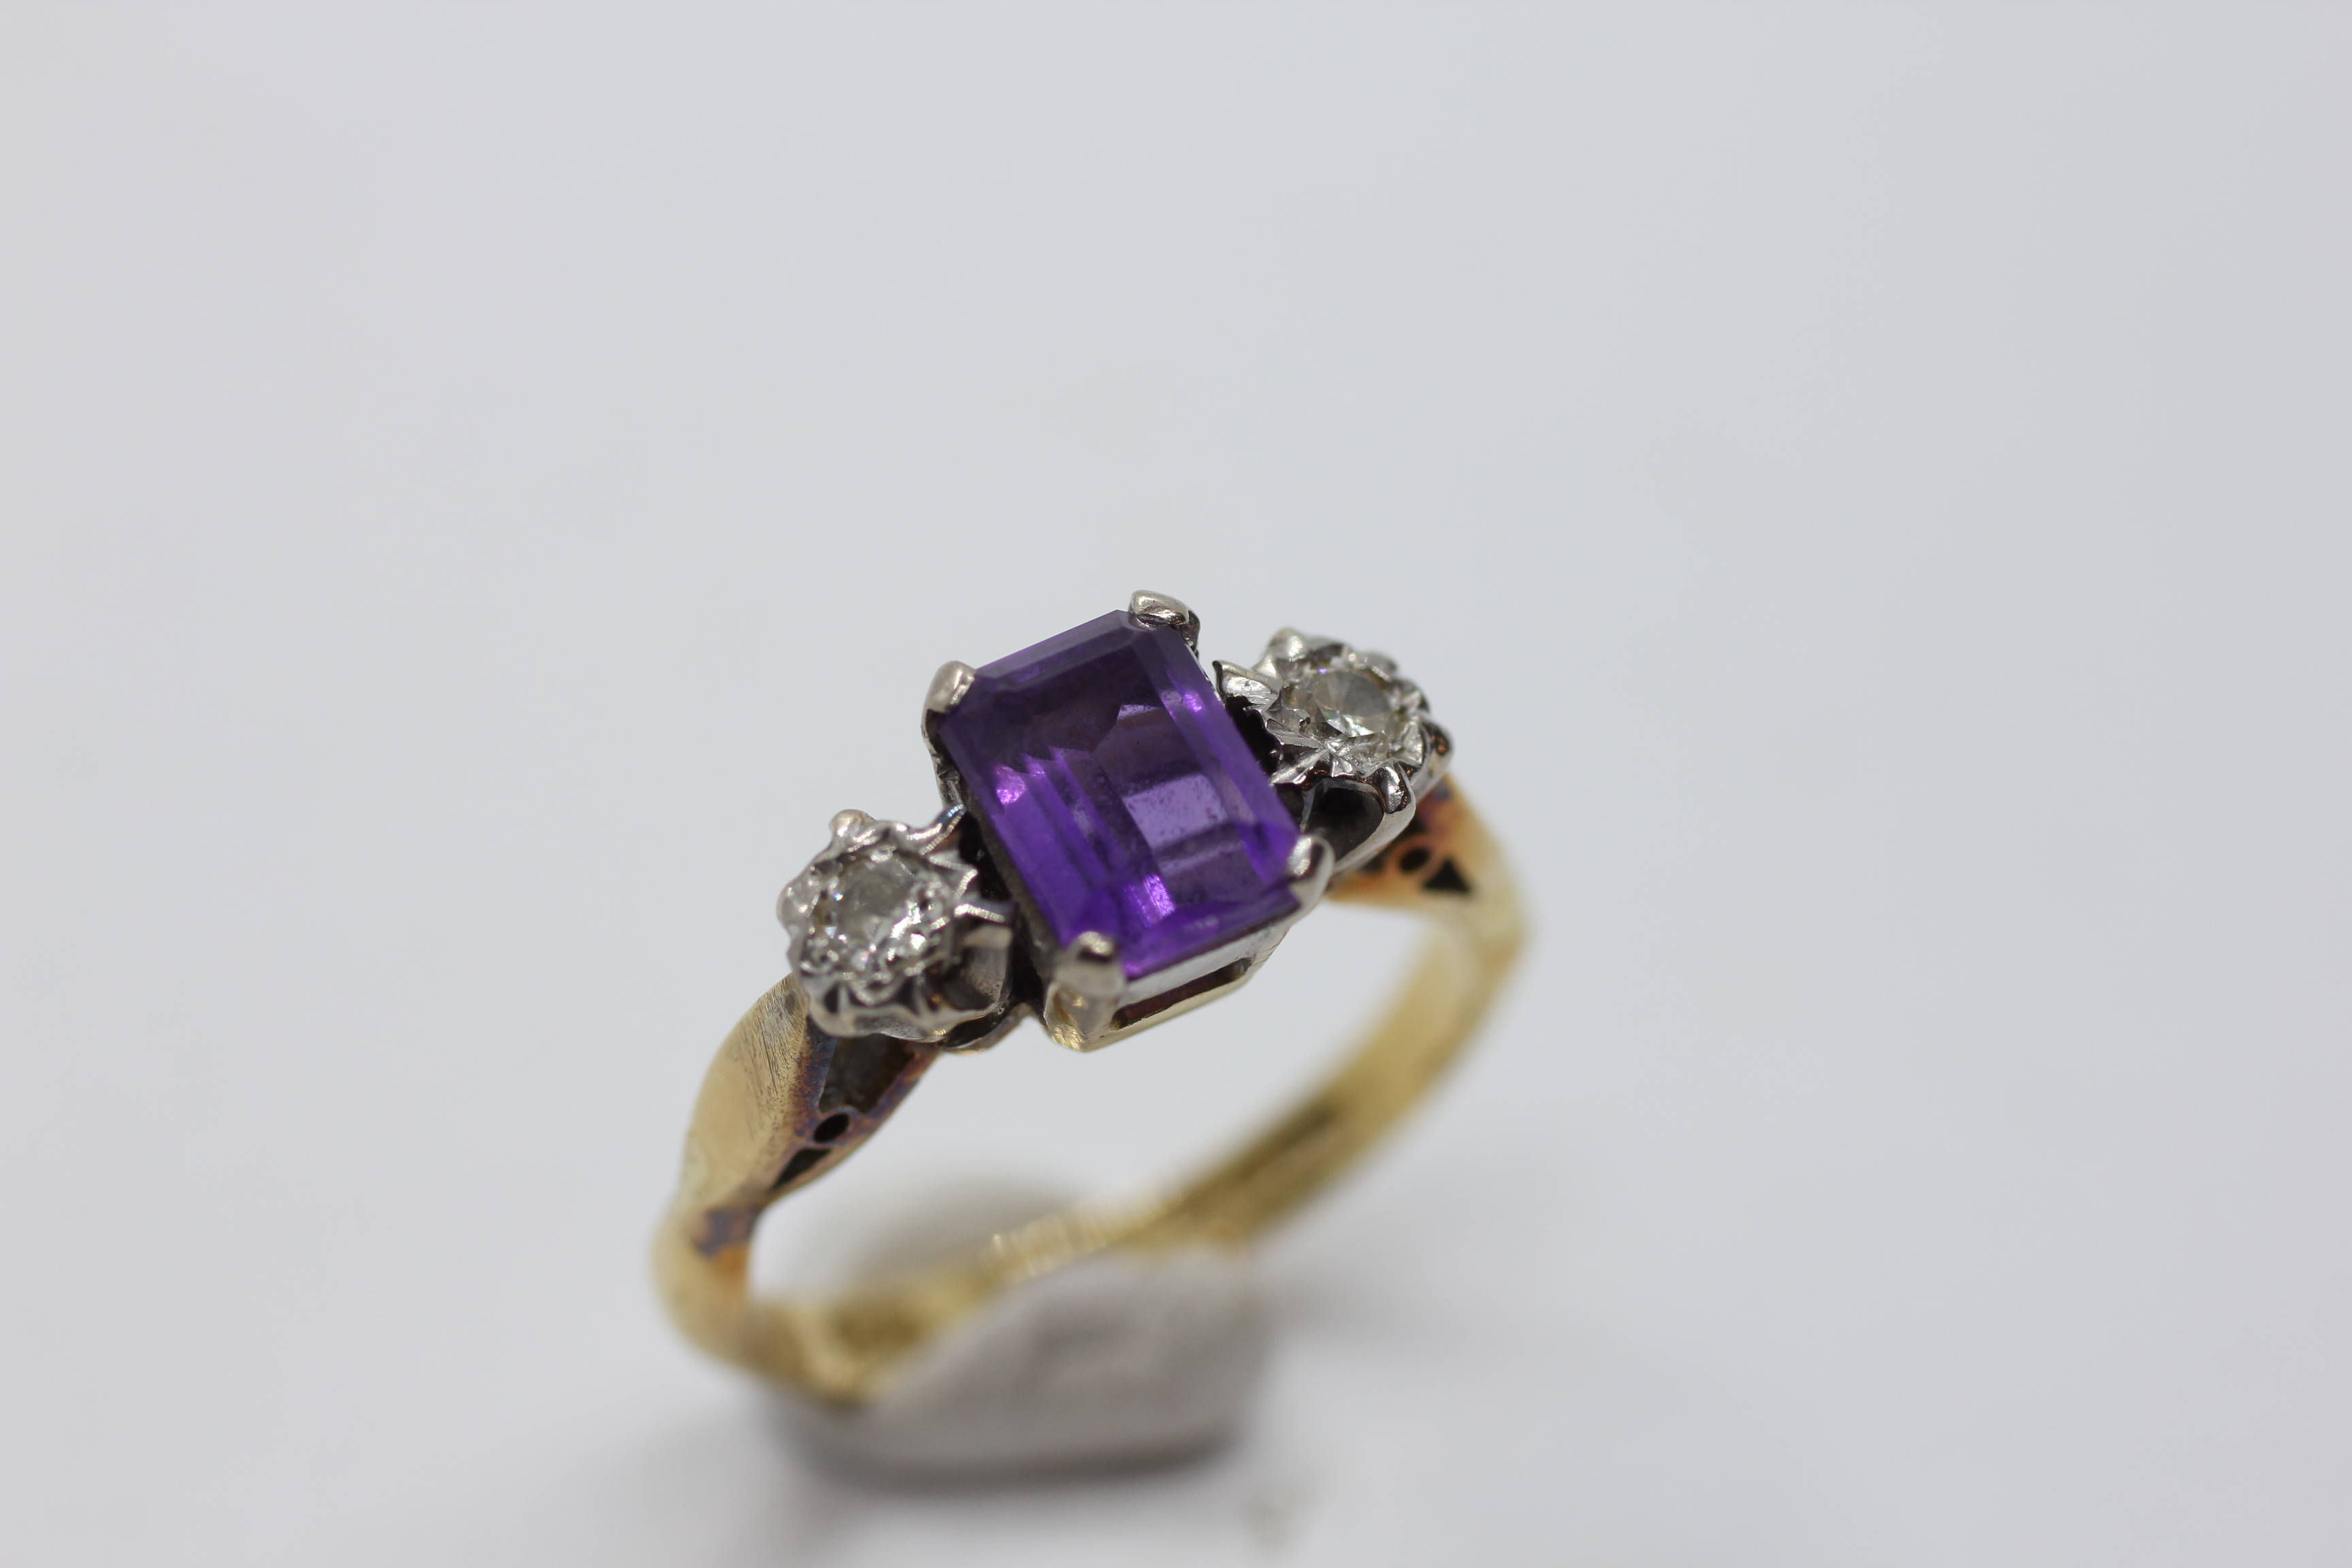 AN 18CT GOLD RING SET WITH A CENTRAL EMERALD CUT AMETHYST AND A DIAMOND EITHER SIDE. - Image 2 of 7